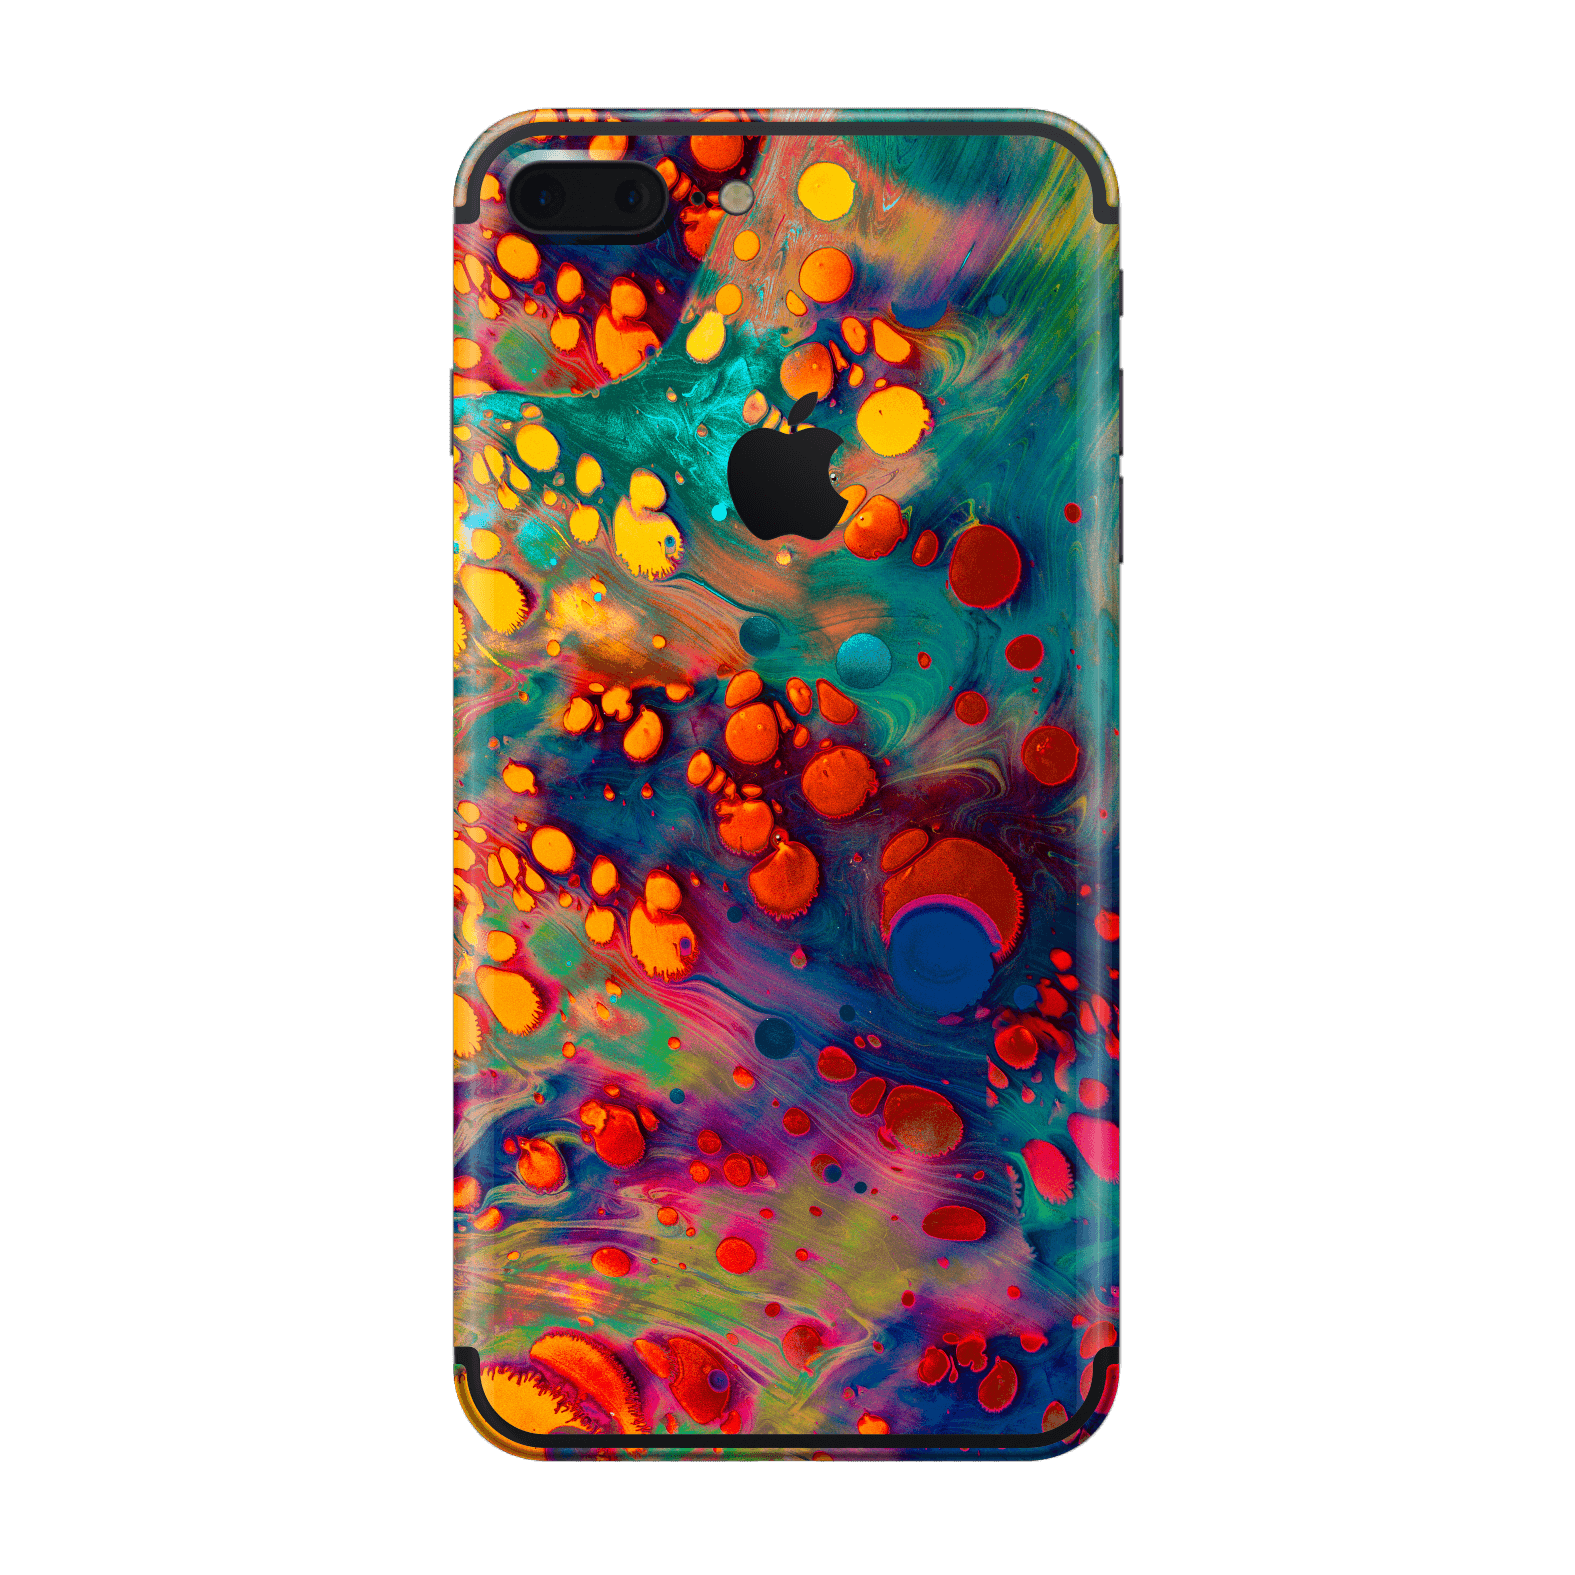 iPhone 7 PLUS Print Printed Custom SIGNATURE Abstract Art Impression Skin Wrap Sticker Decal Cover Protector by EasySkinz | EasySkinz.com